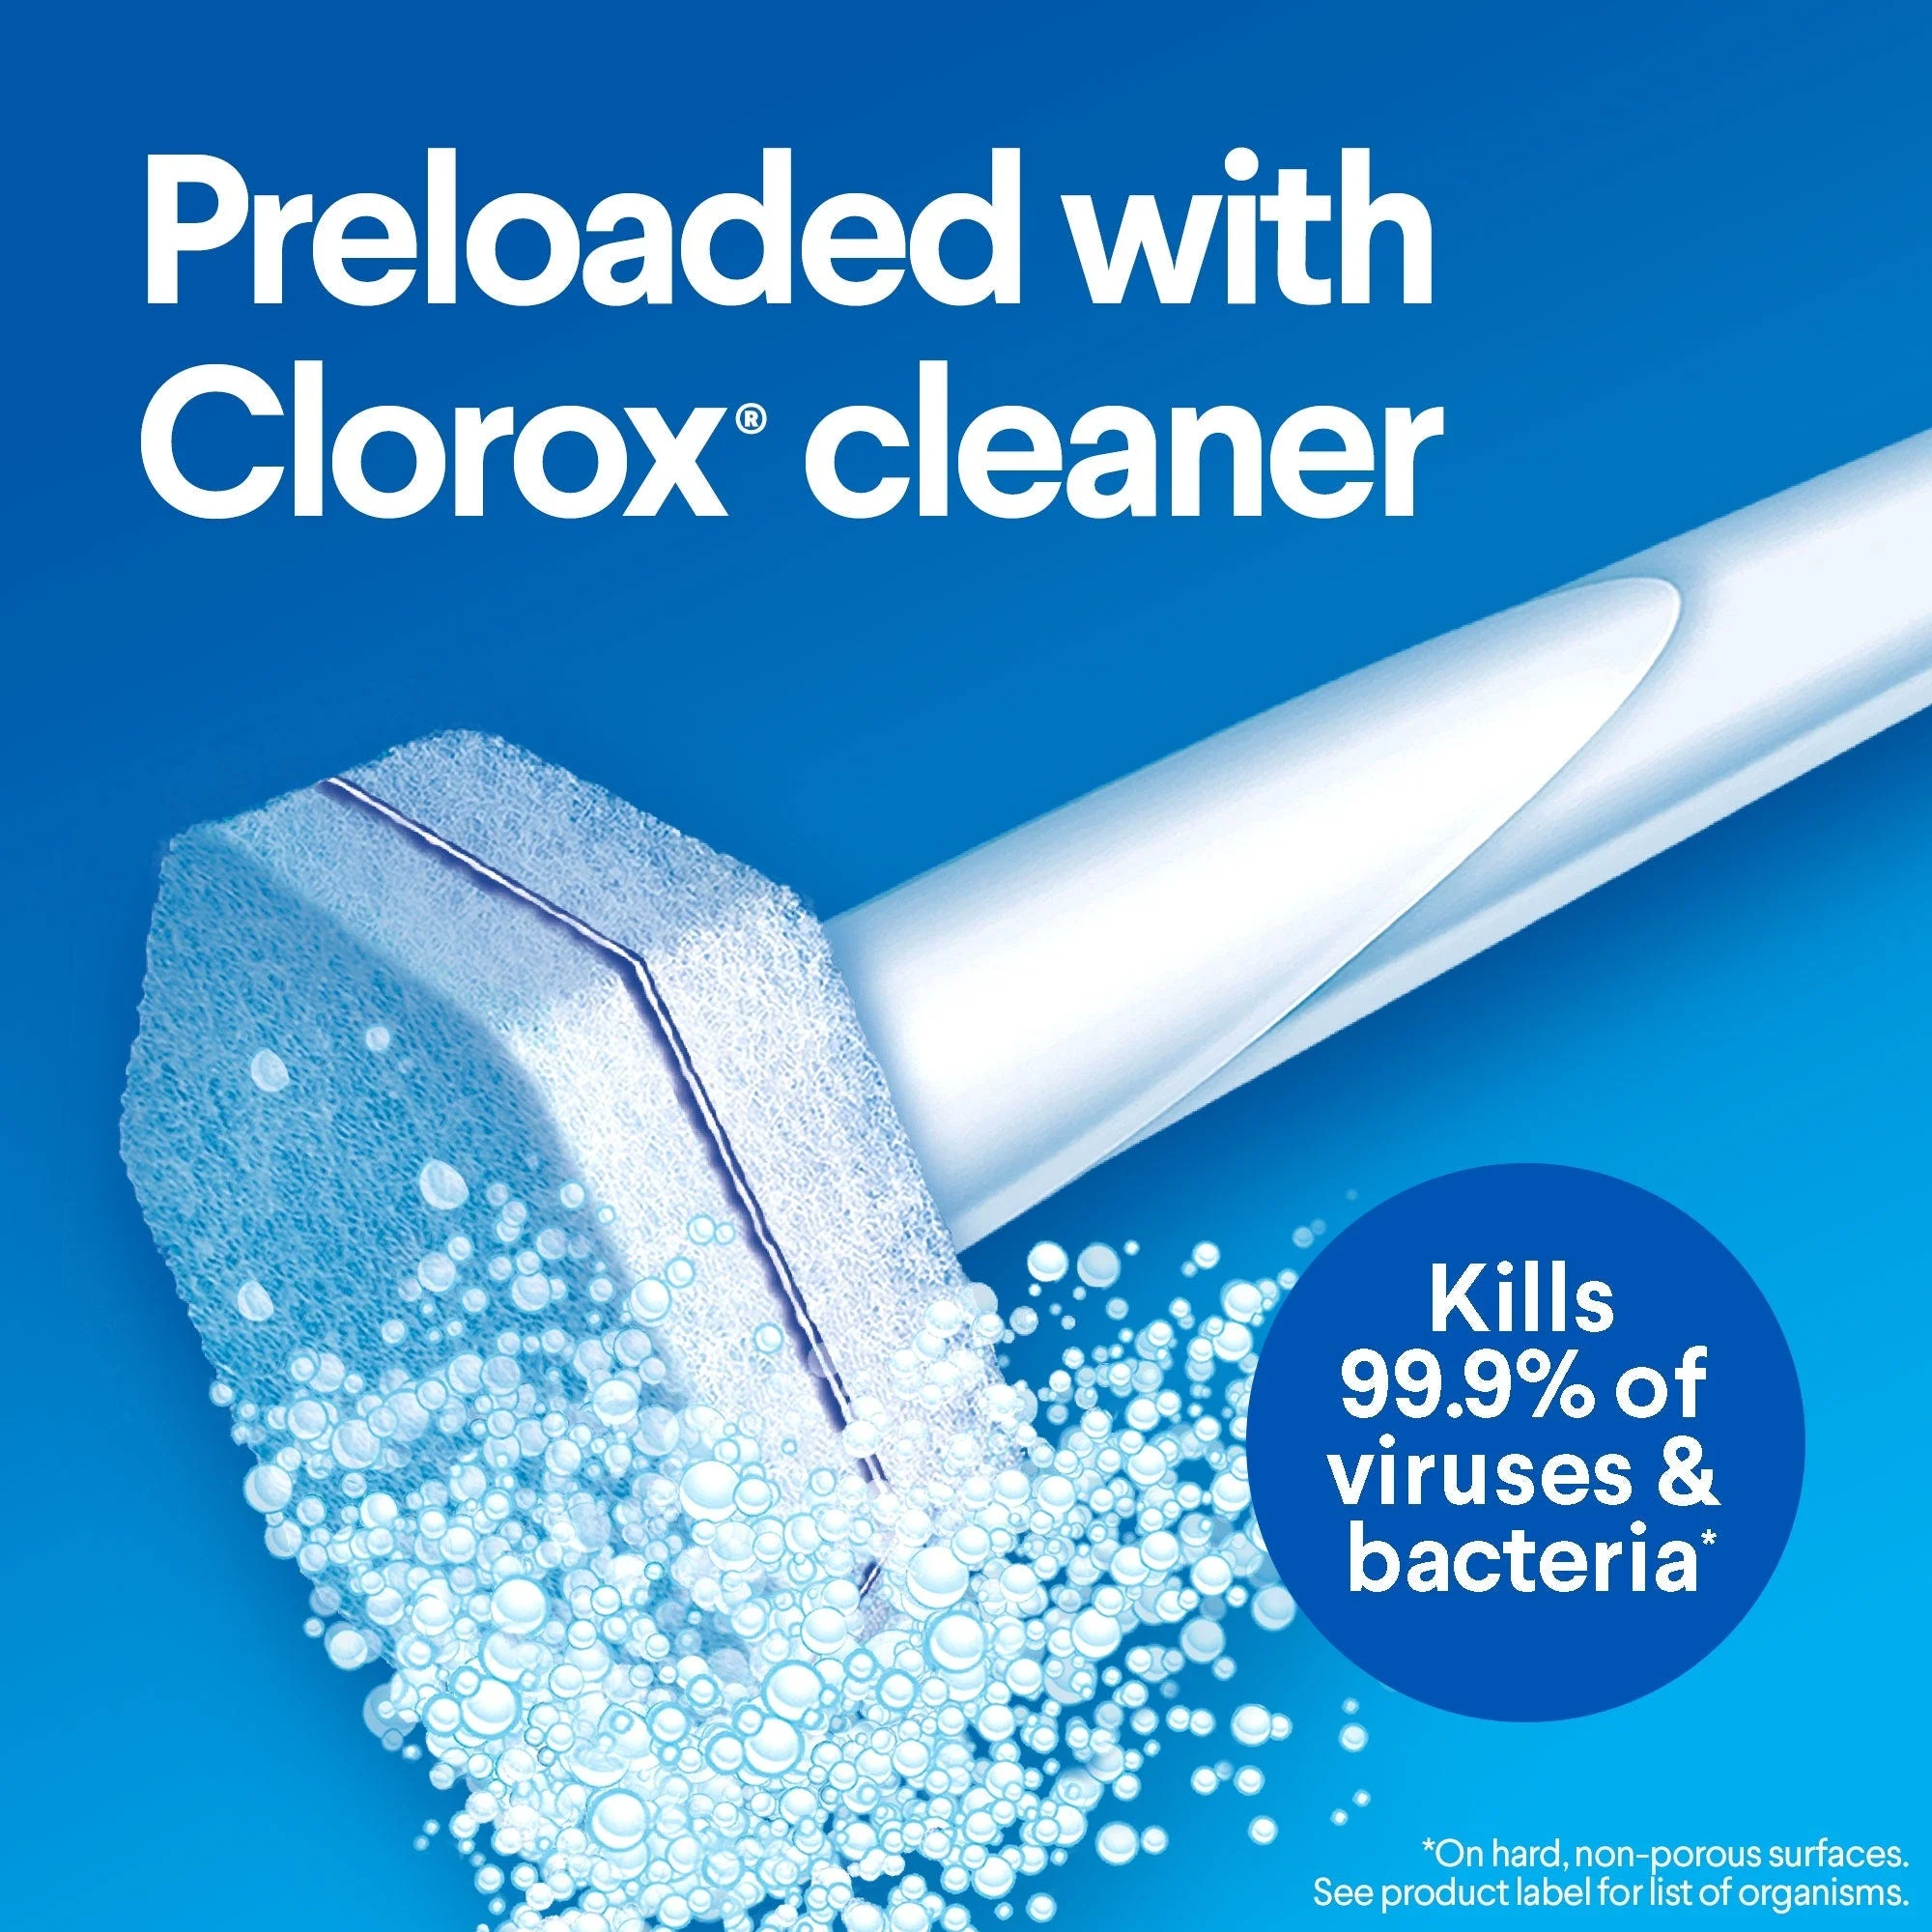 pre-loaded with Clorox cleaner, kills 99.95 of viruses & bacteria on hard, nonporous surfaces